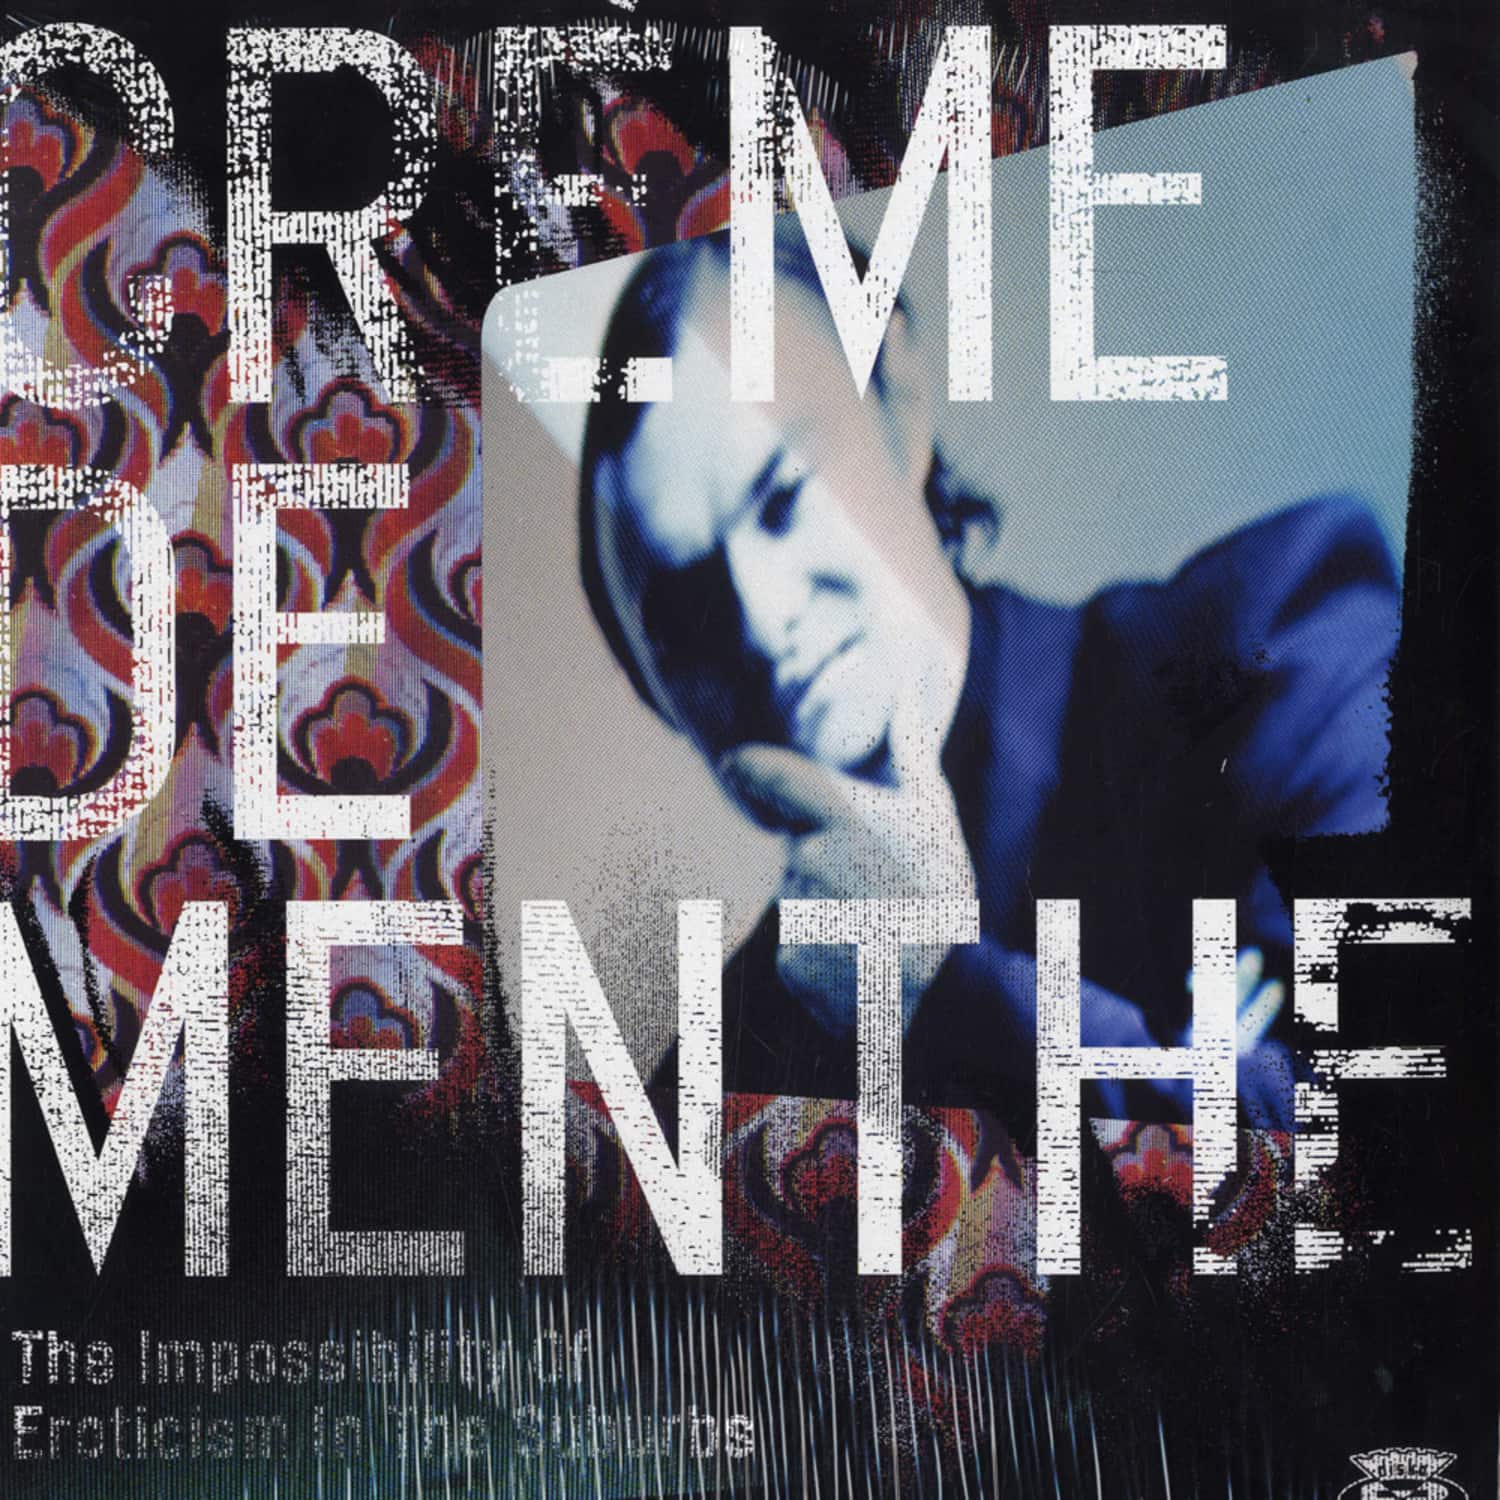 Creme De Menthe - THE IMPOSSIBILITY OF EROTICISM IN THE SUBURBS 